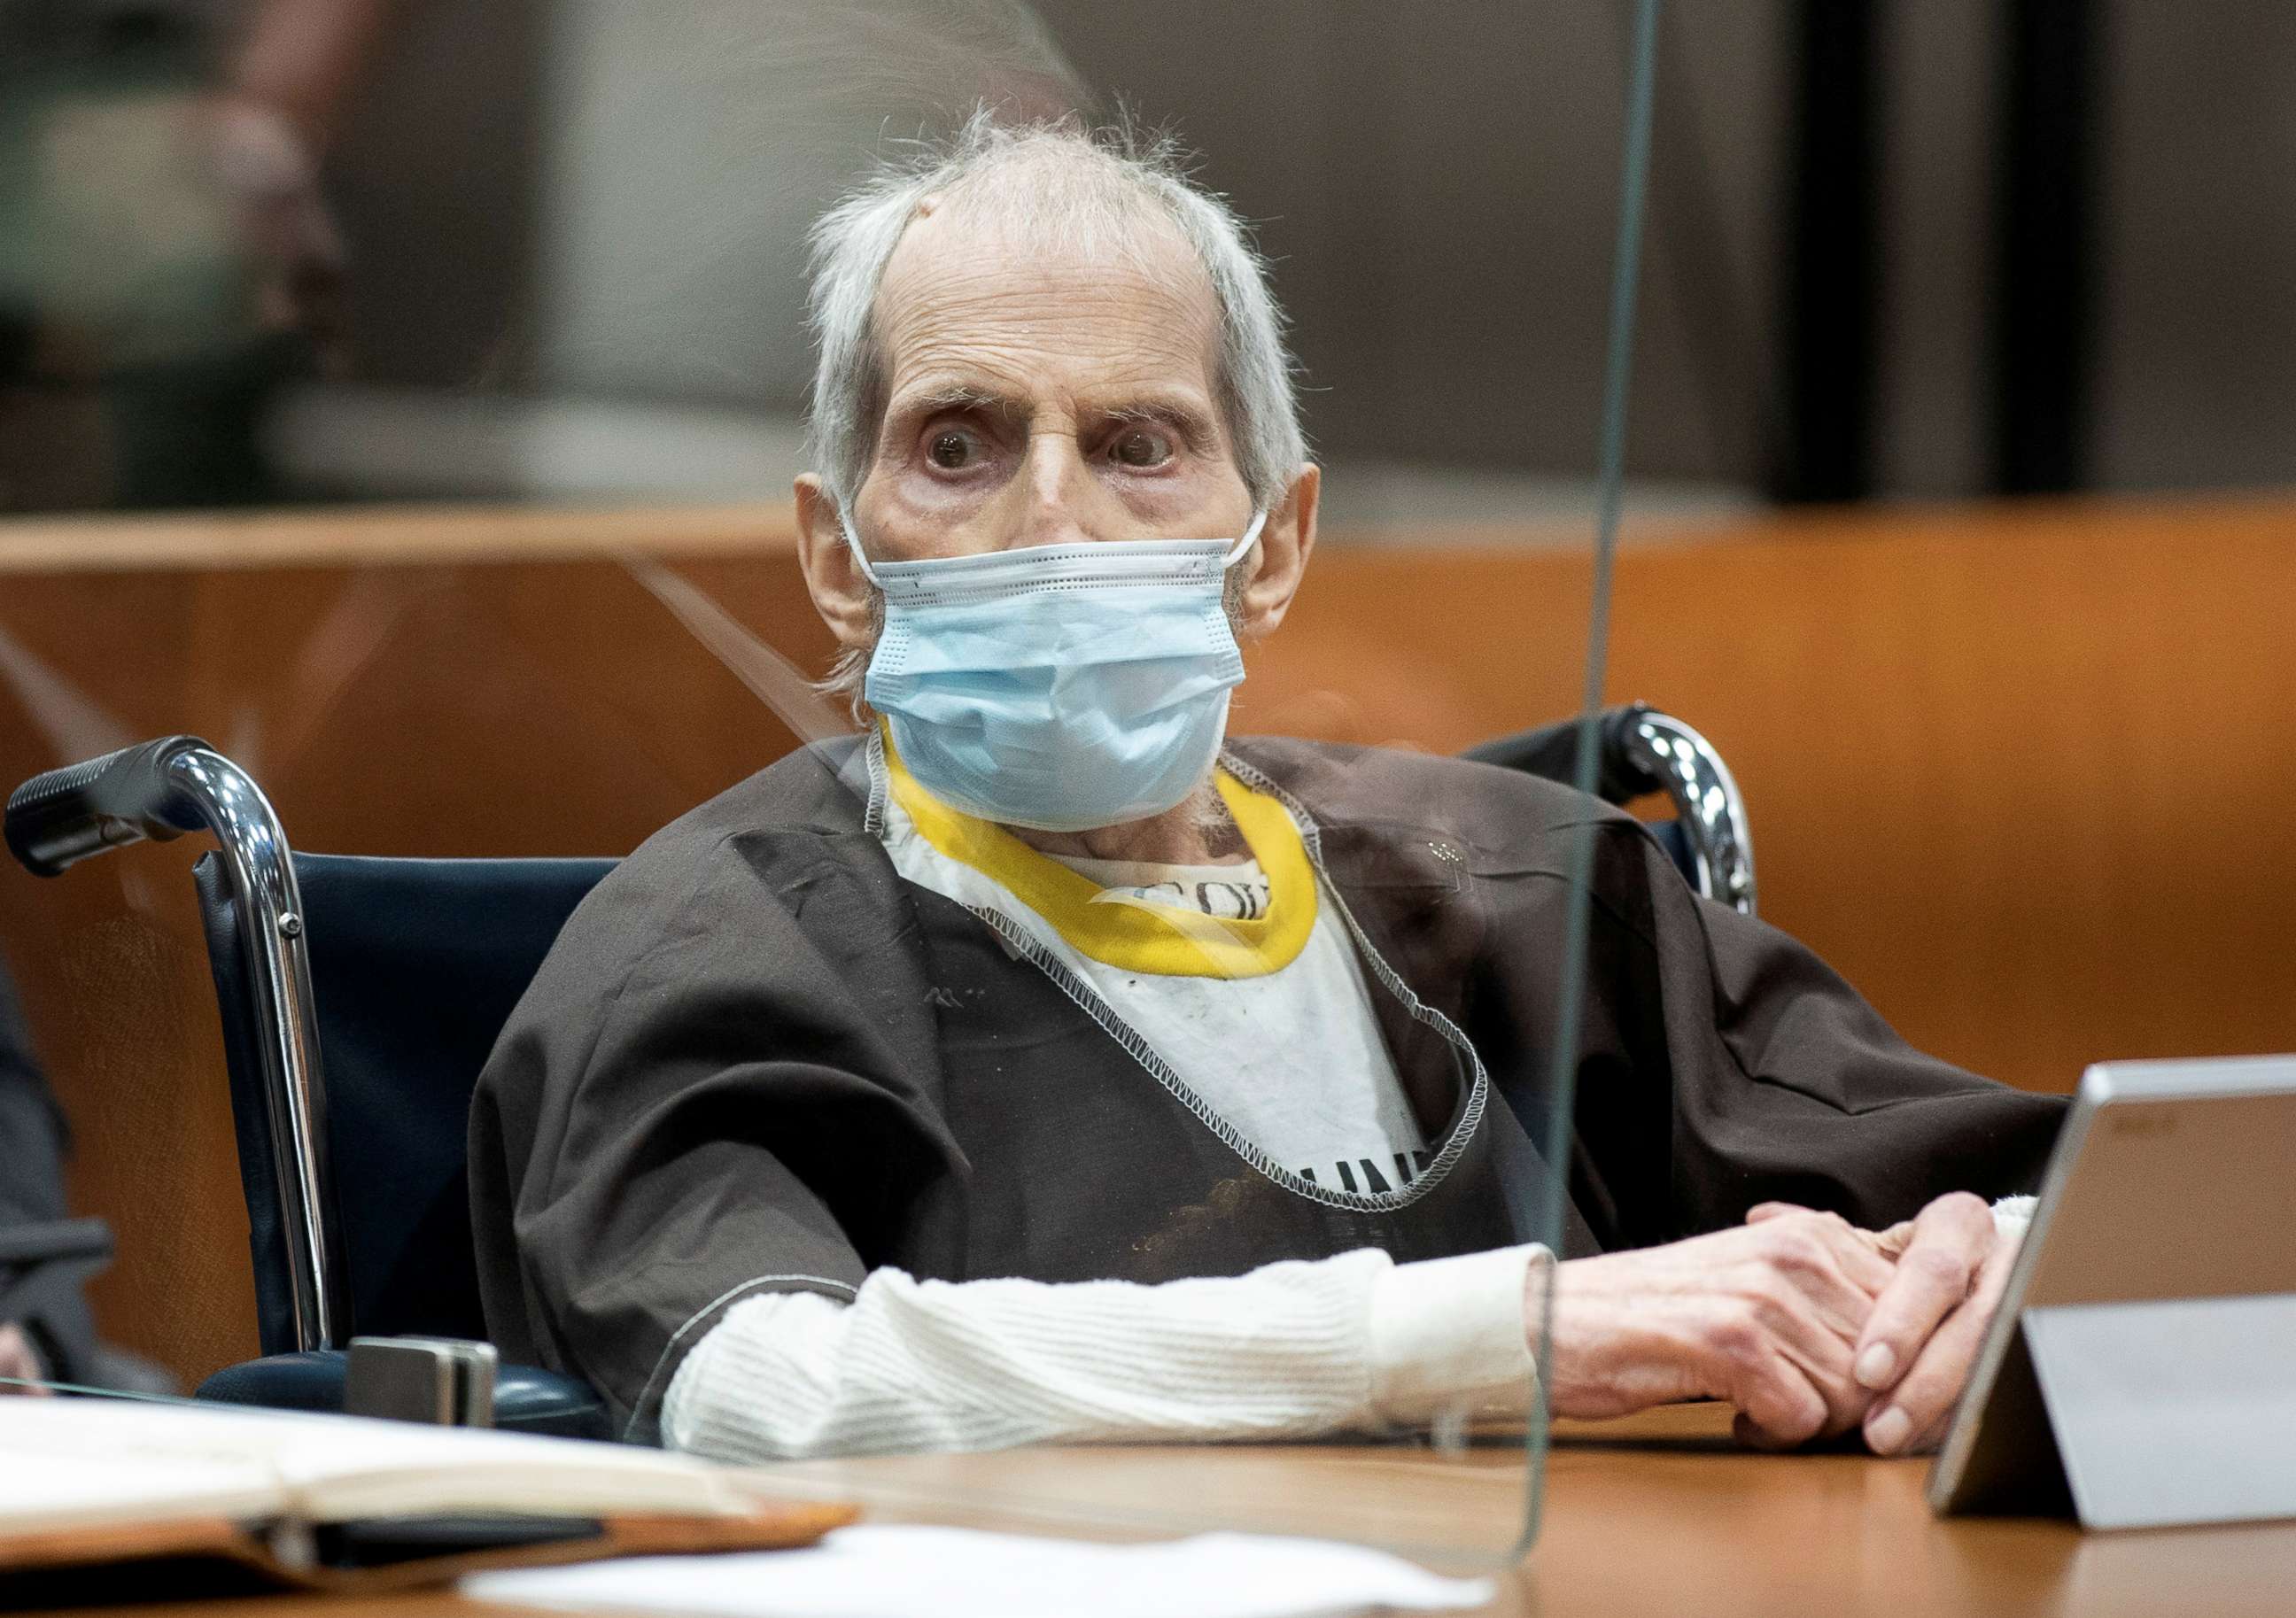 PHOTO: Robert Durst appears in court as he was sentenced to life without possibility of parole for the killing of Susan Berman, at Airport Courthouse, in Los Angeles, Oct. 14, 2021.